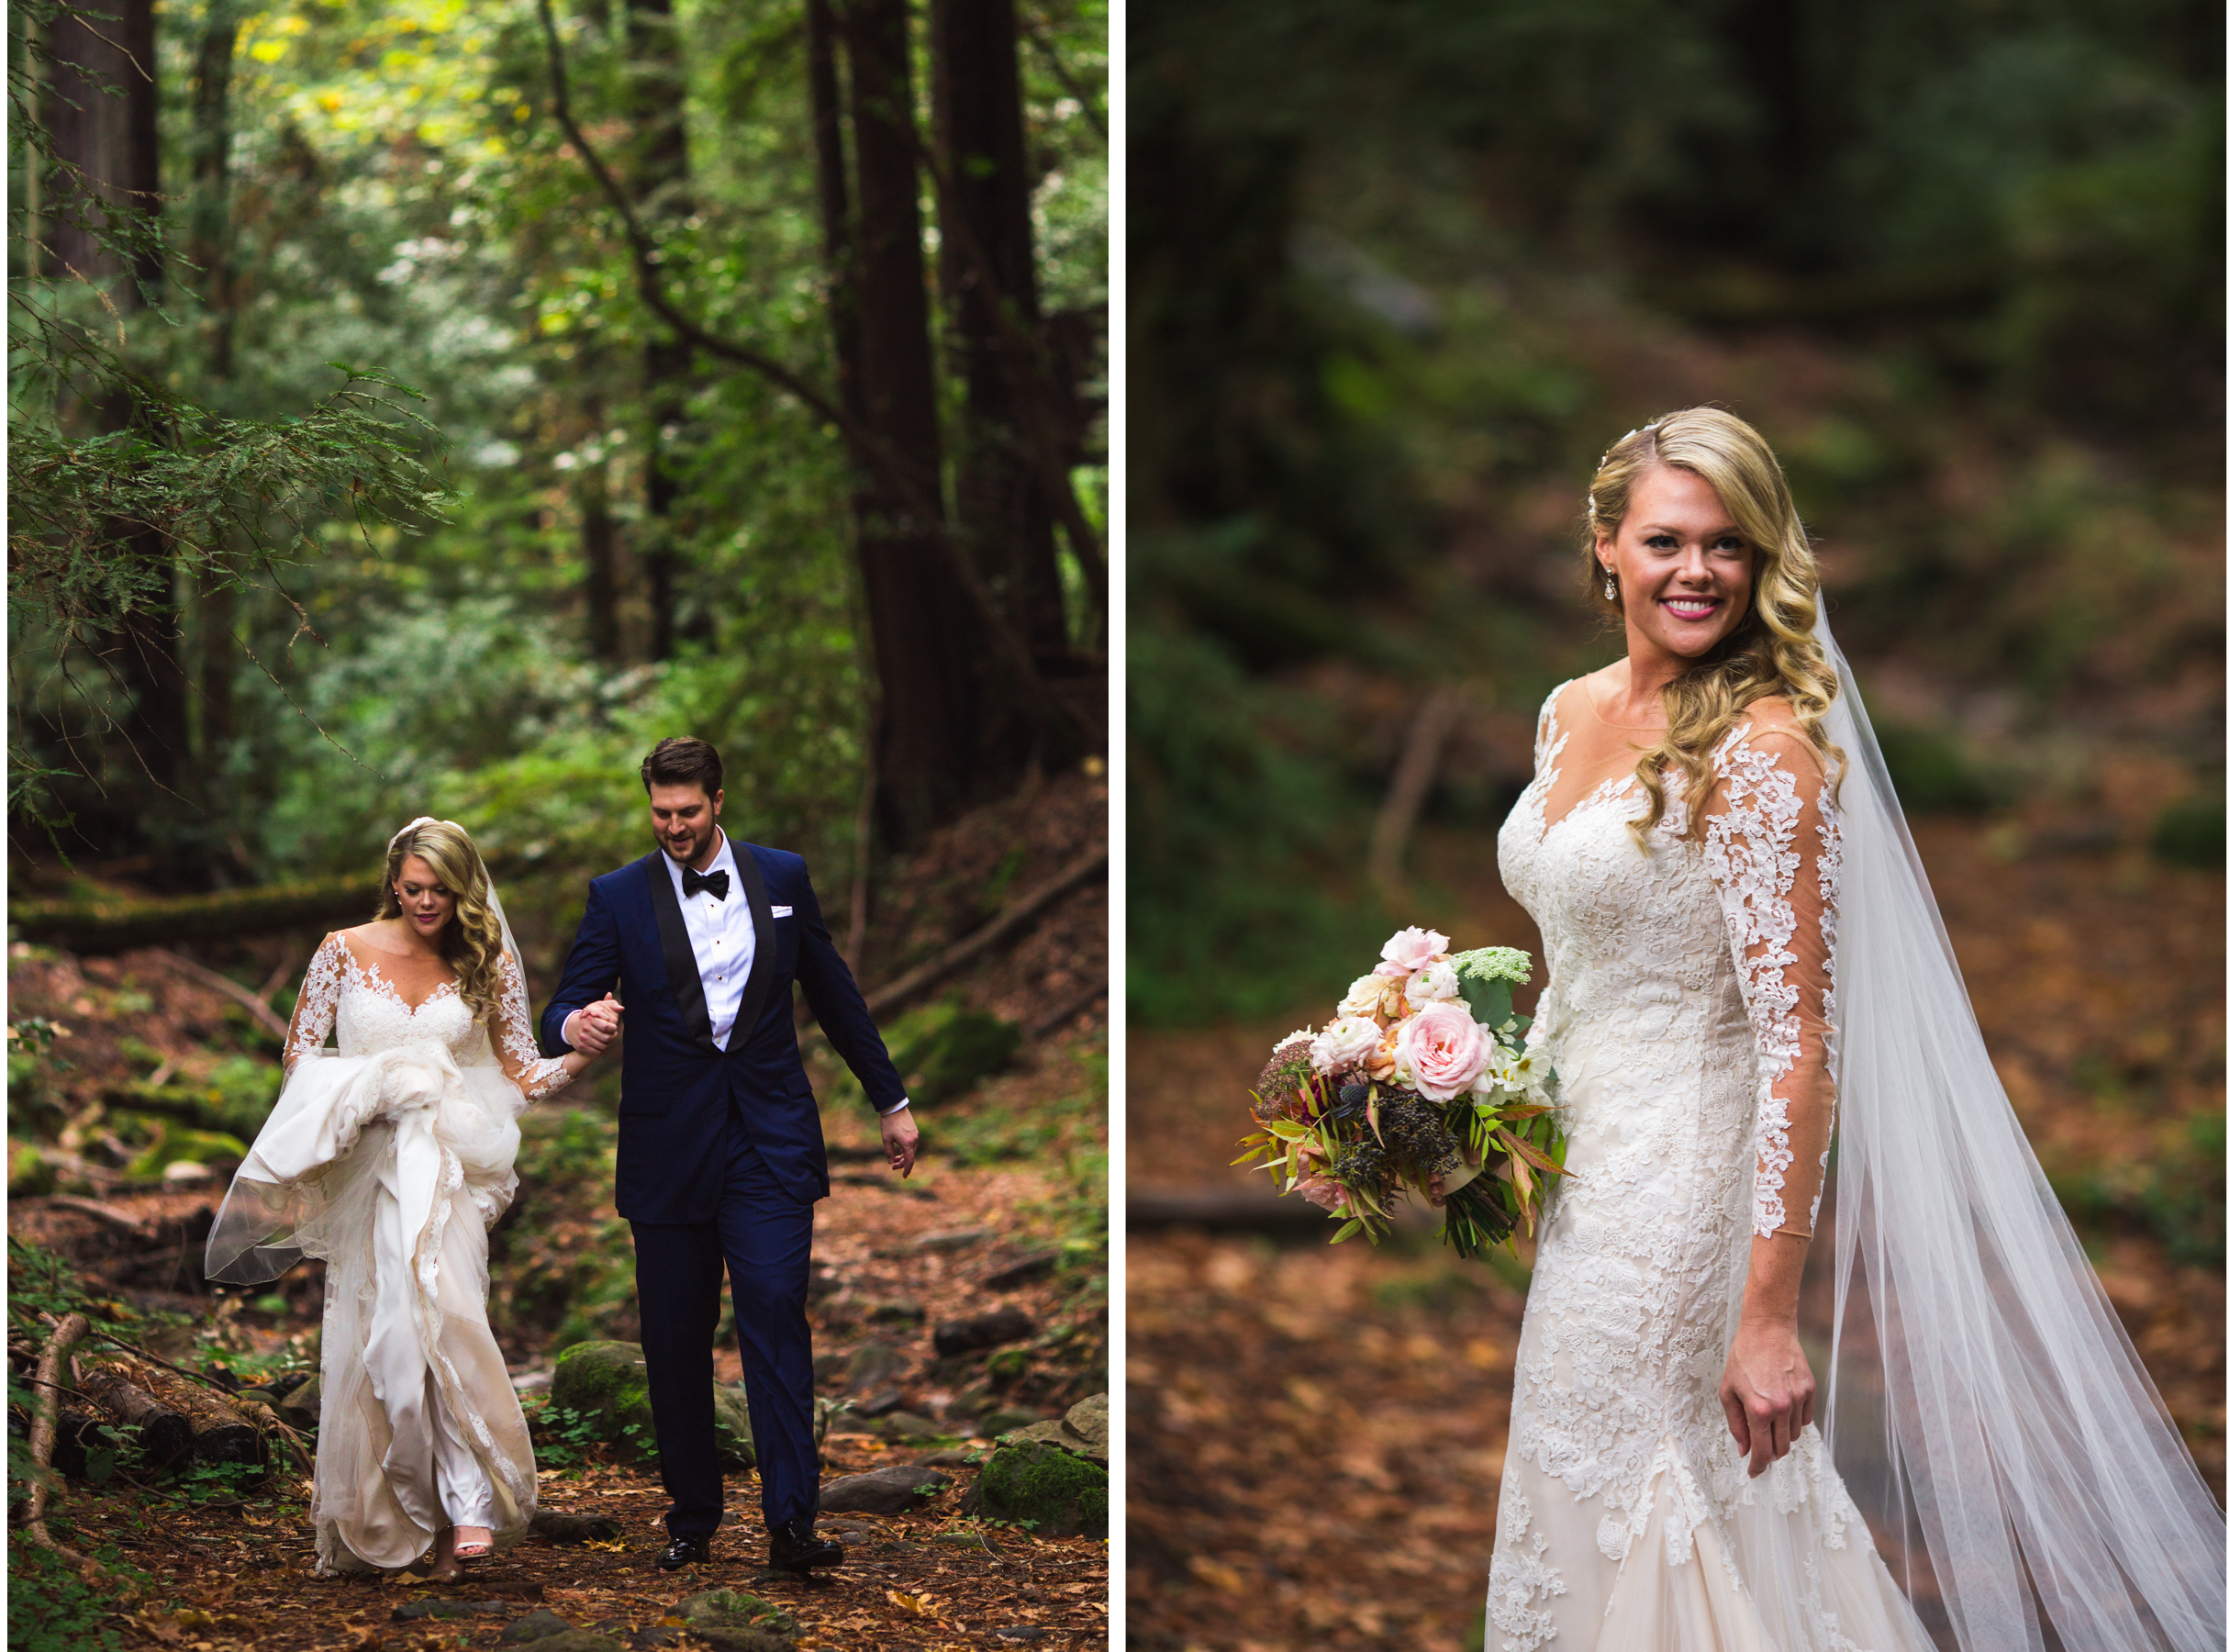 Saratoga Springs Wedding California San Francisco Photographer Bride and Groom running in the Redwoods Forest